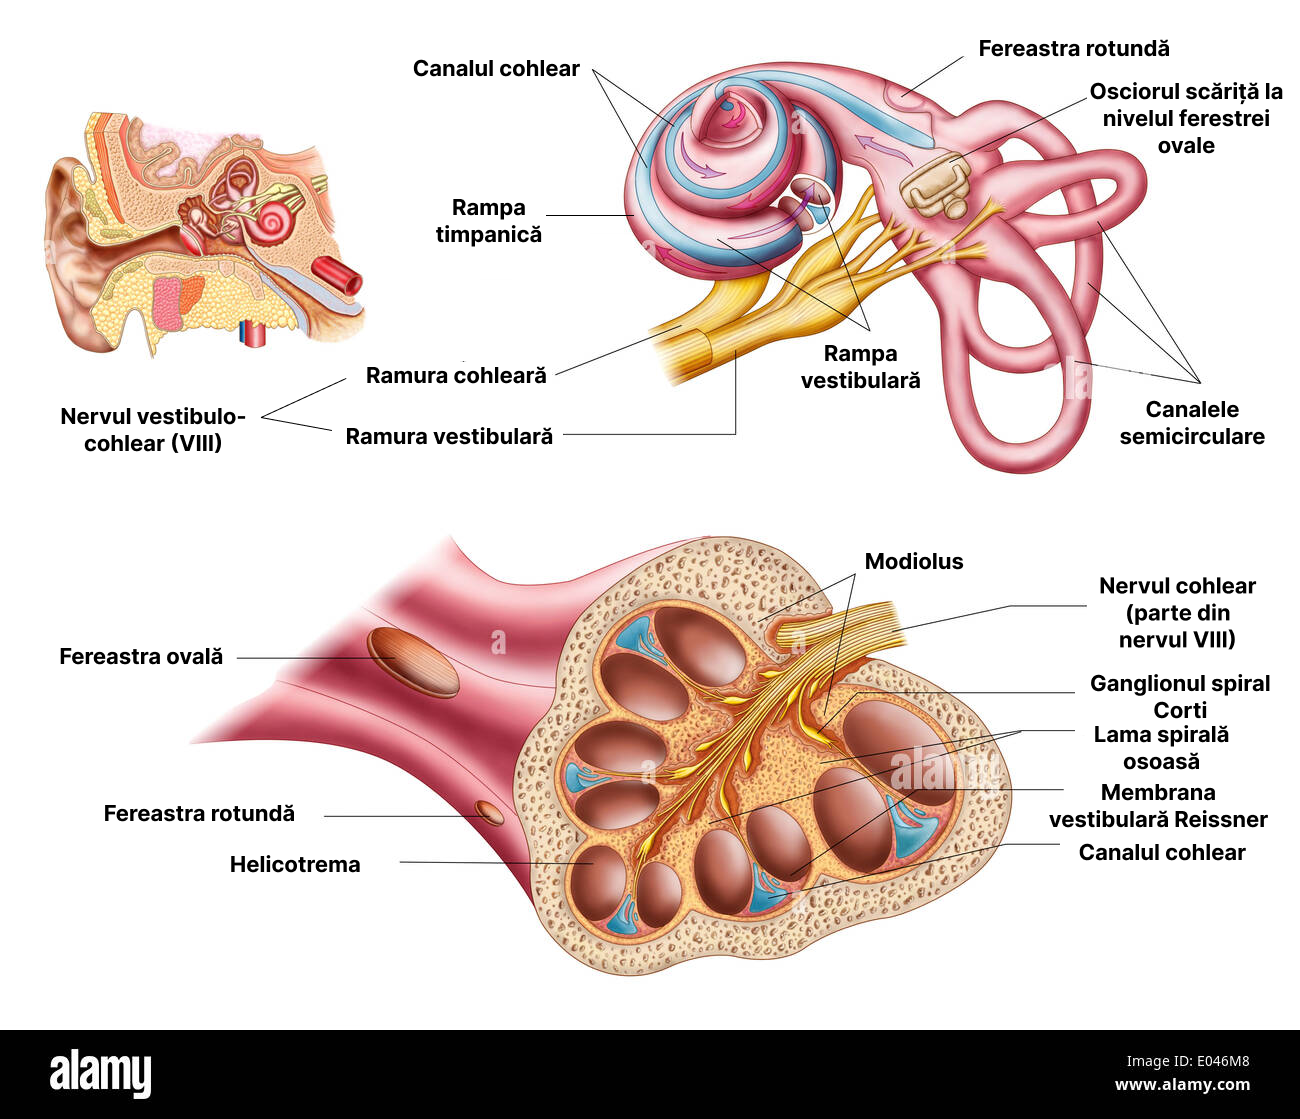 Anatomia canalului cohlear (melcul membranos).